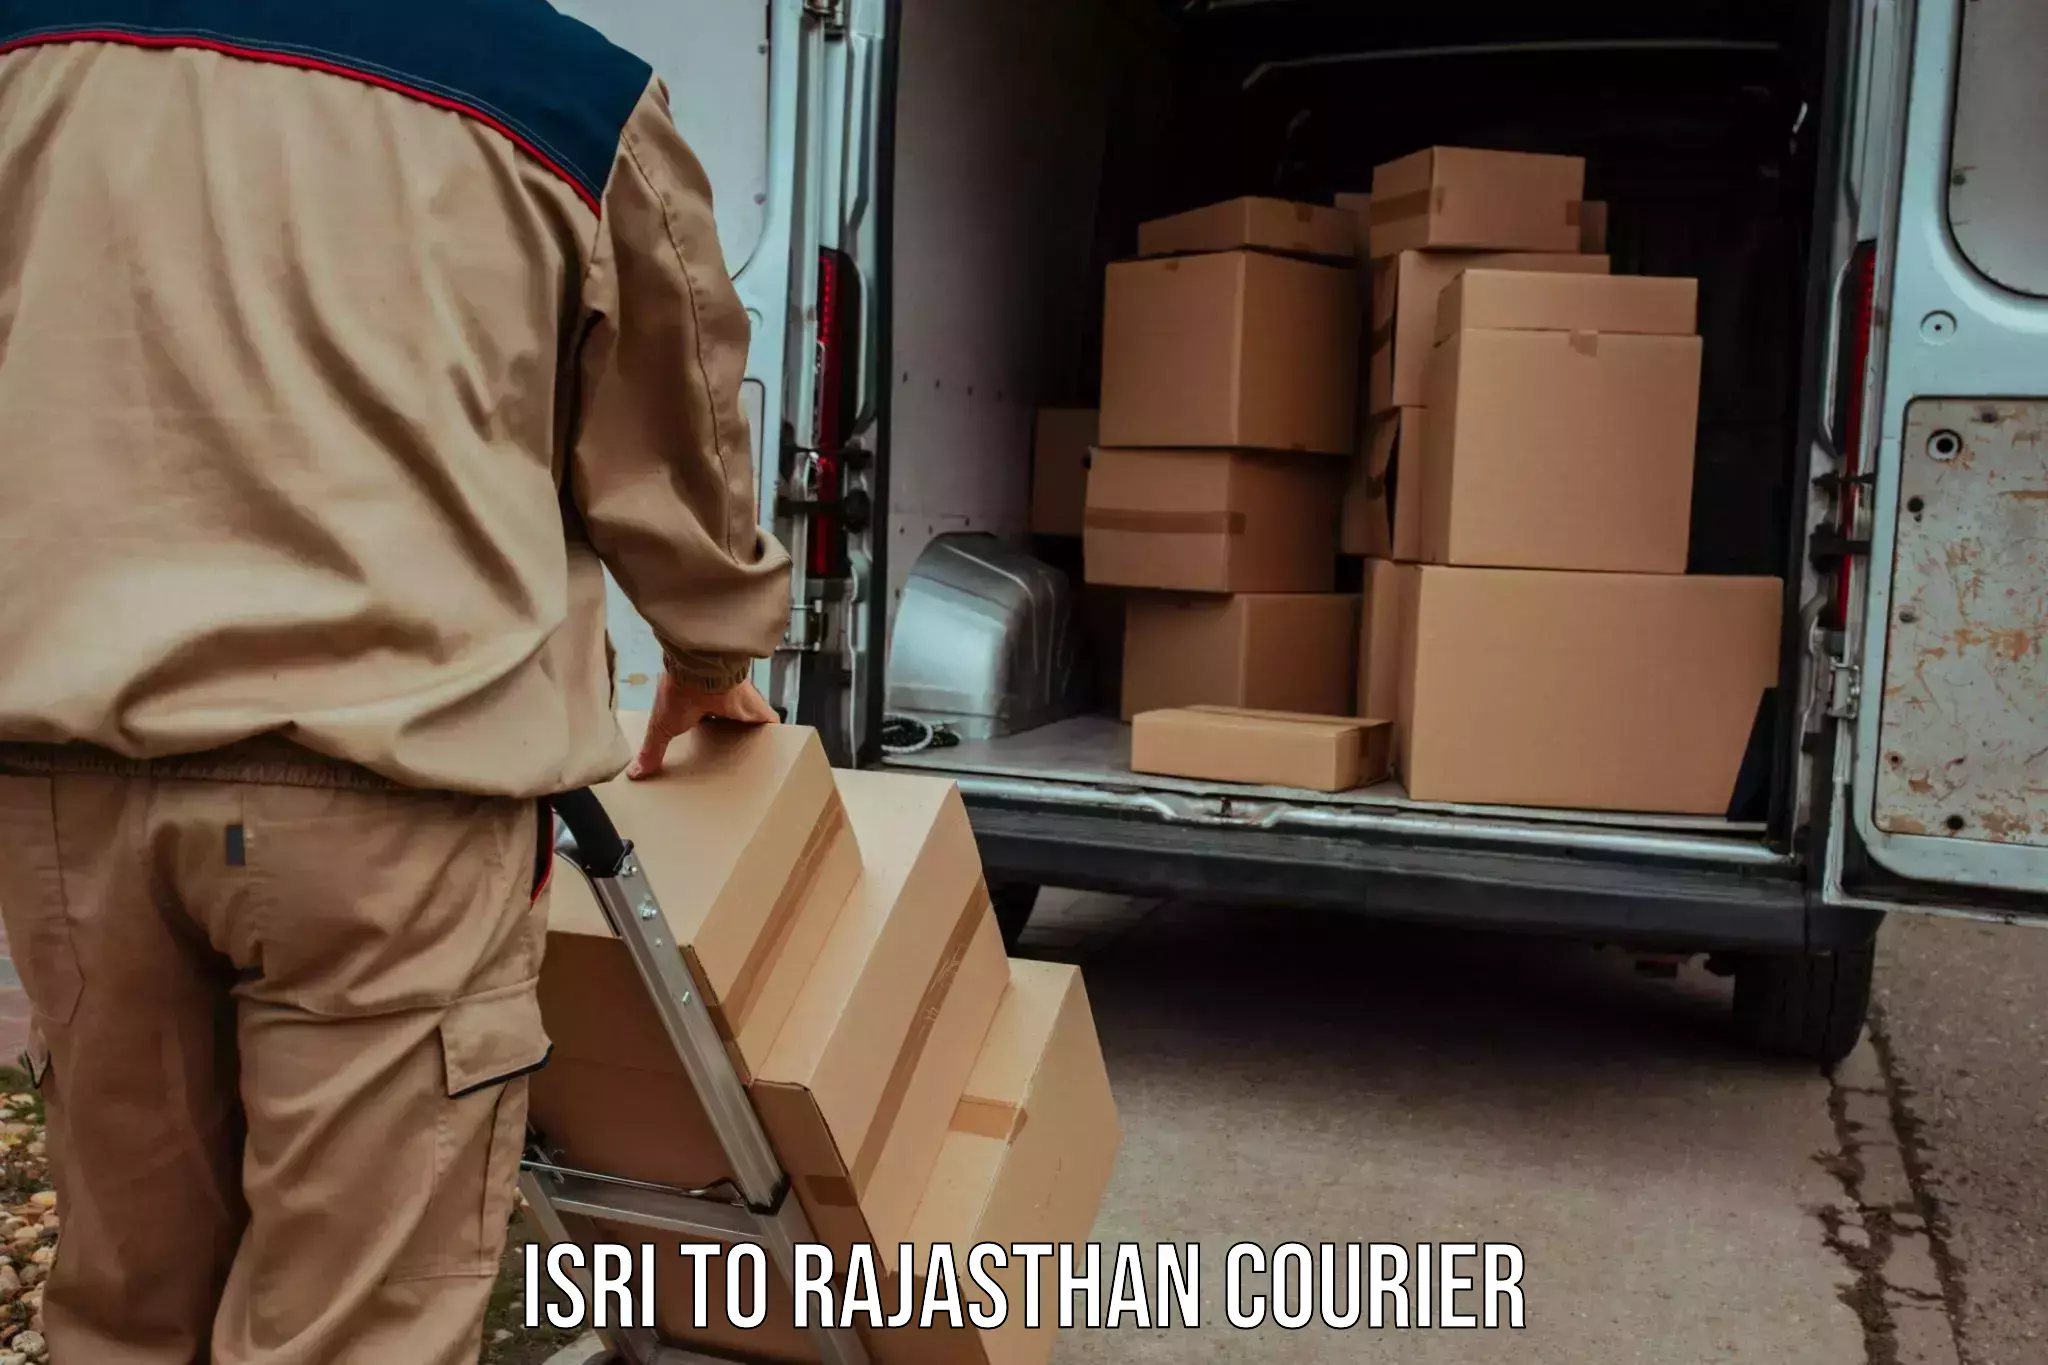 Easy access courier services Isri to Bissau